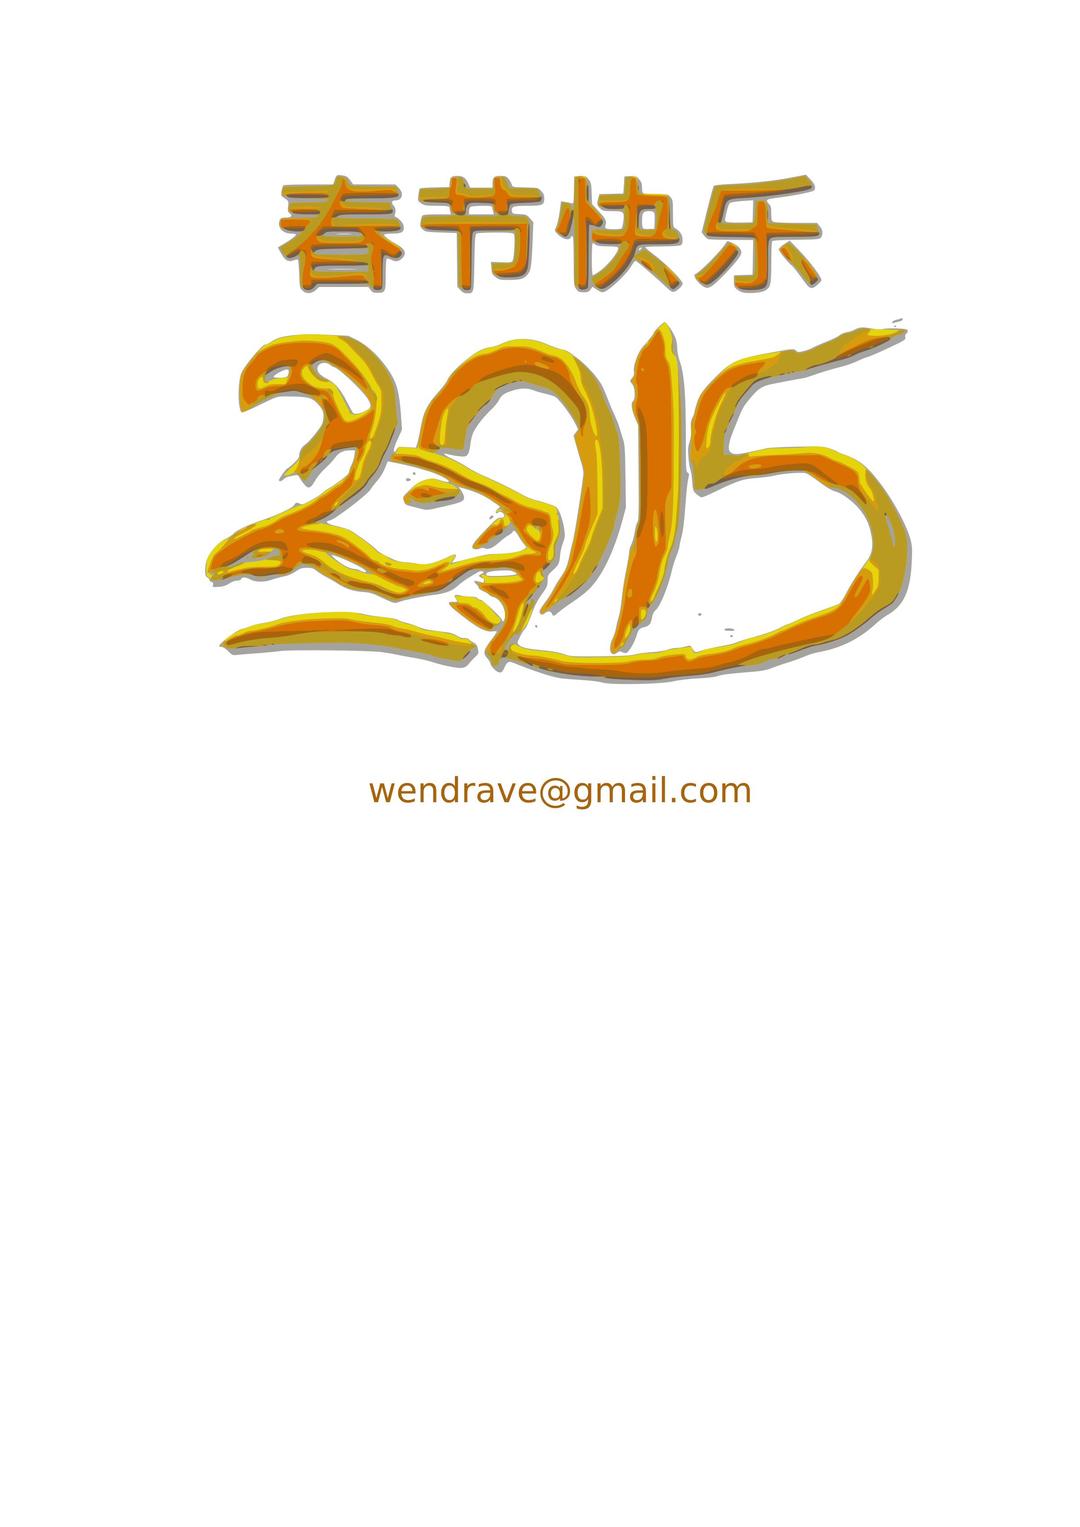 Chinese New Year 2015 - Goat png transparent